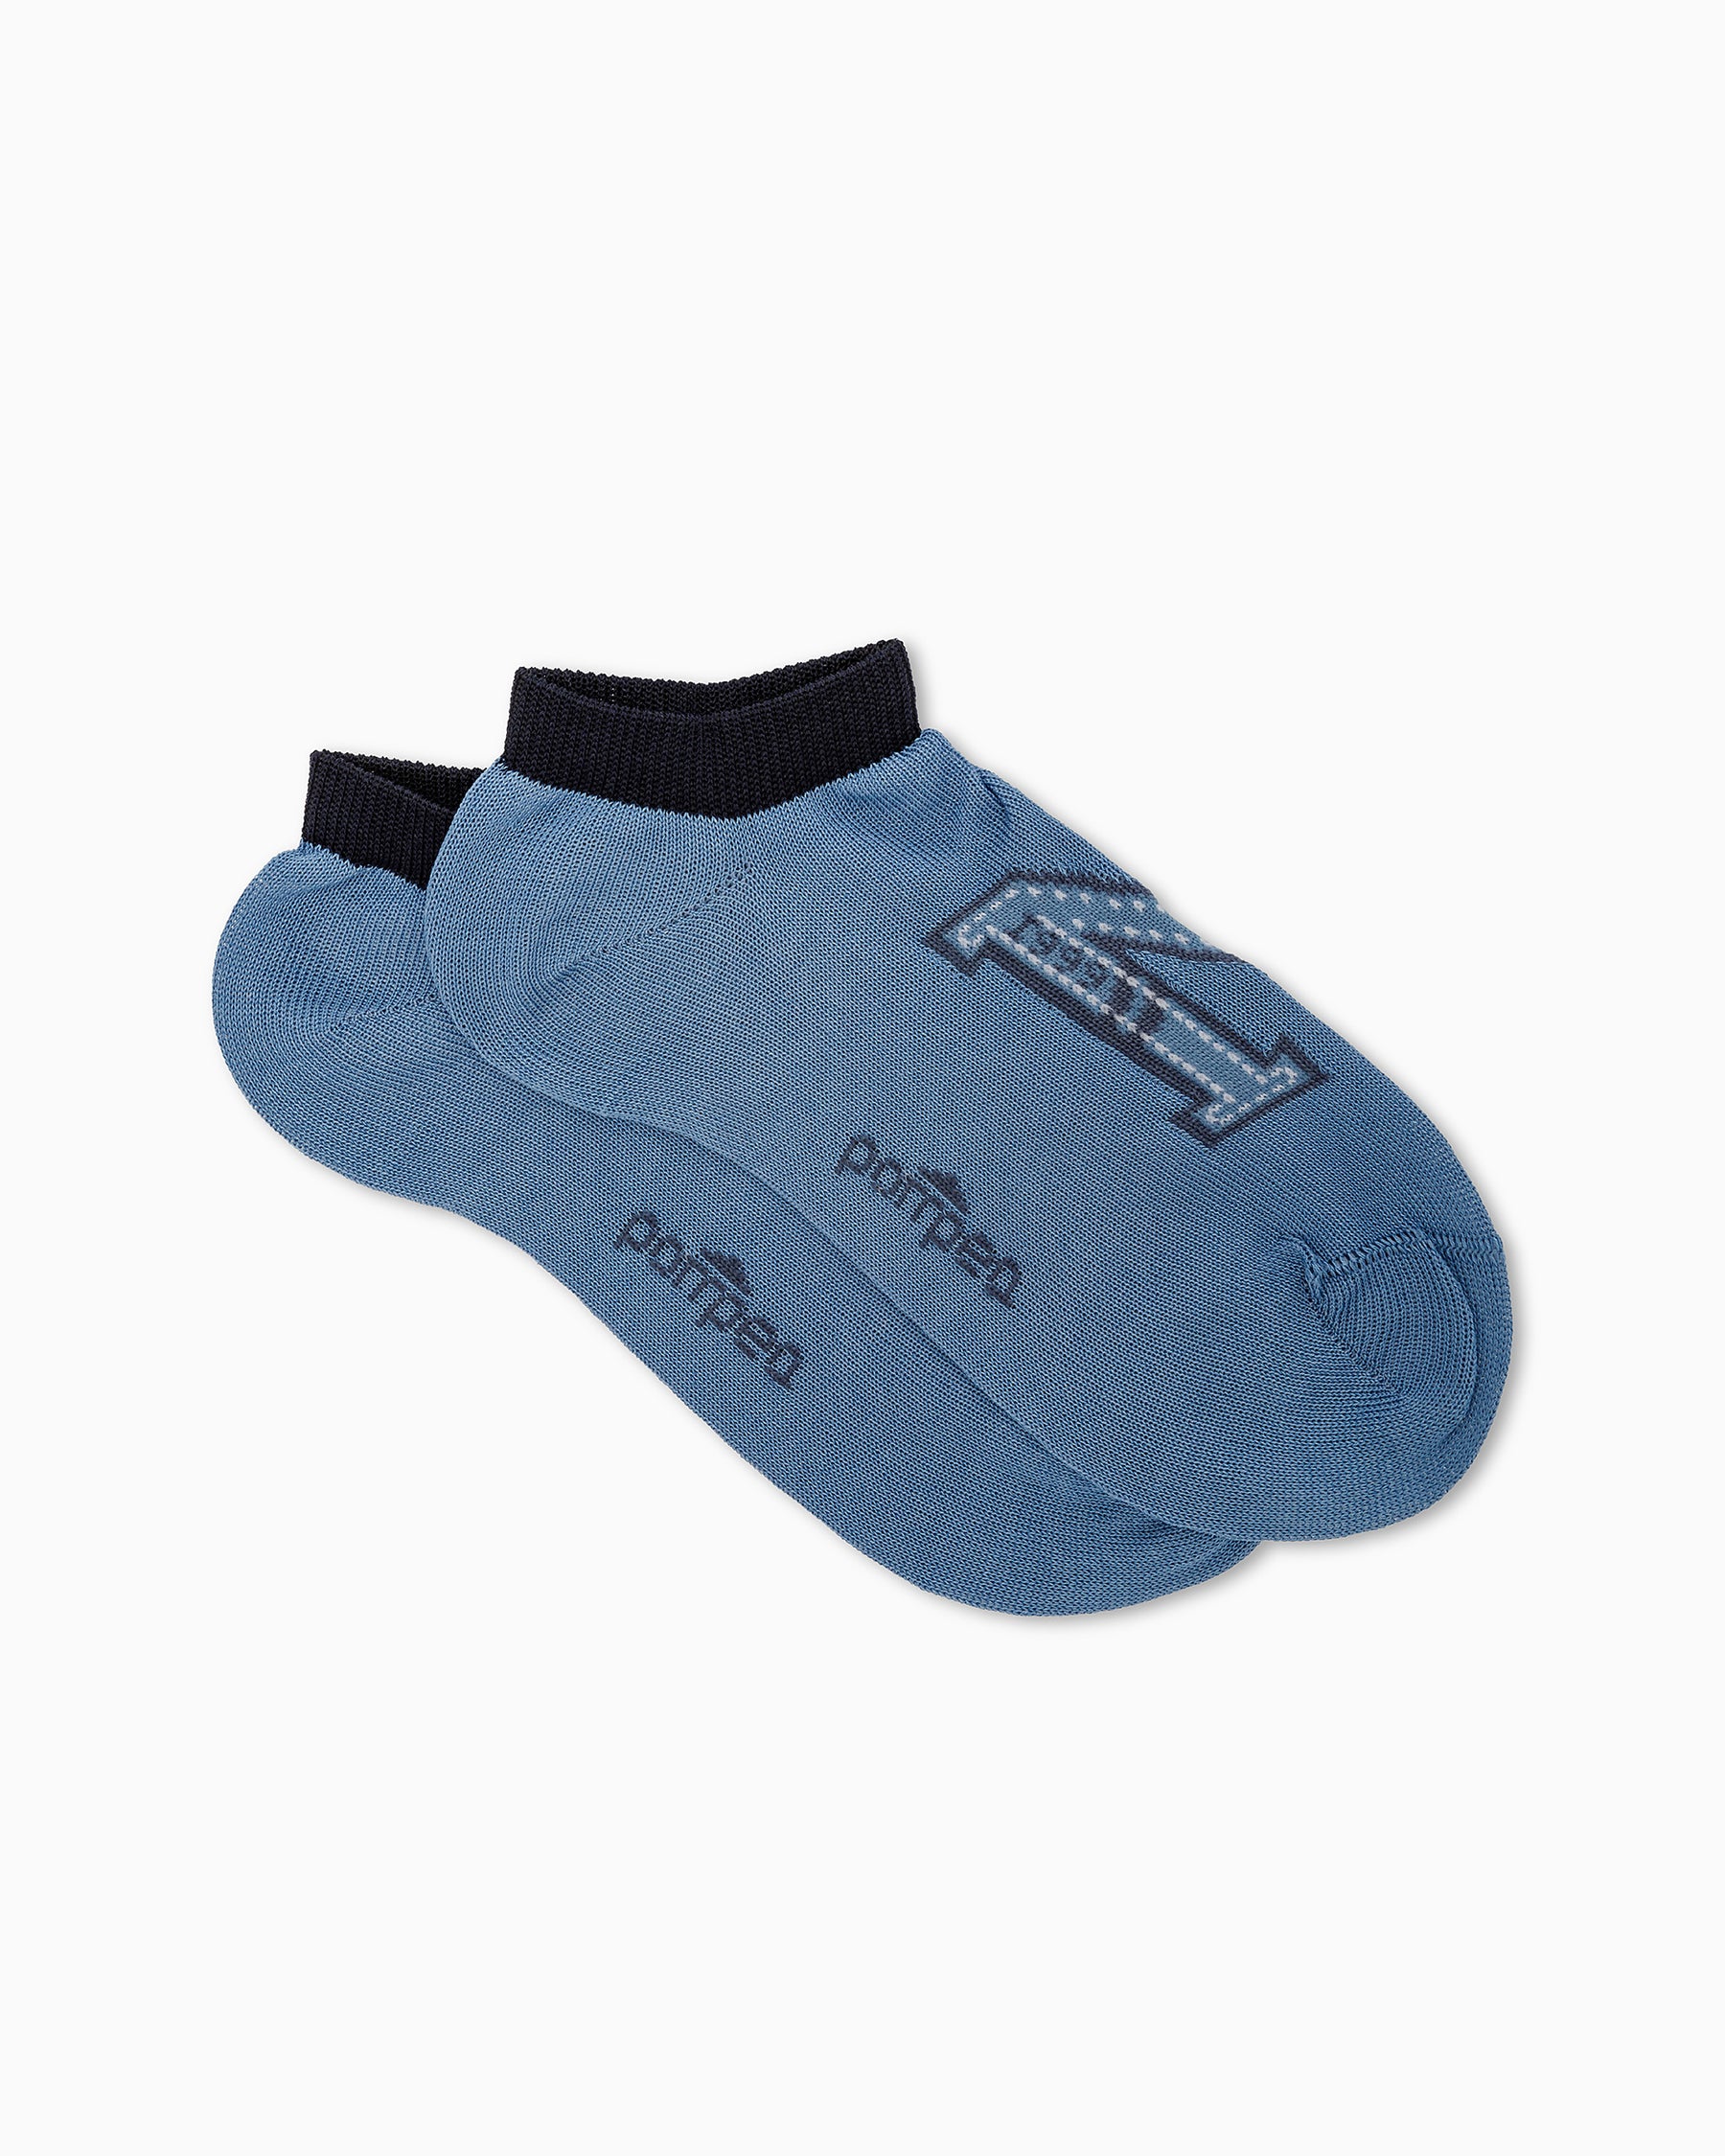 BOYS' CARDELLINO TRAINER LINERS 